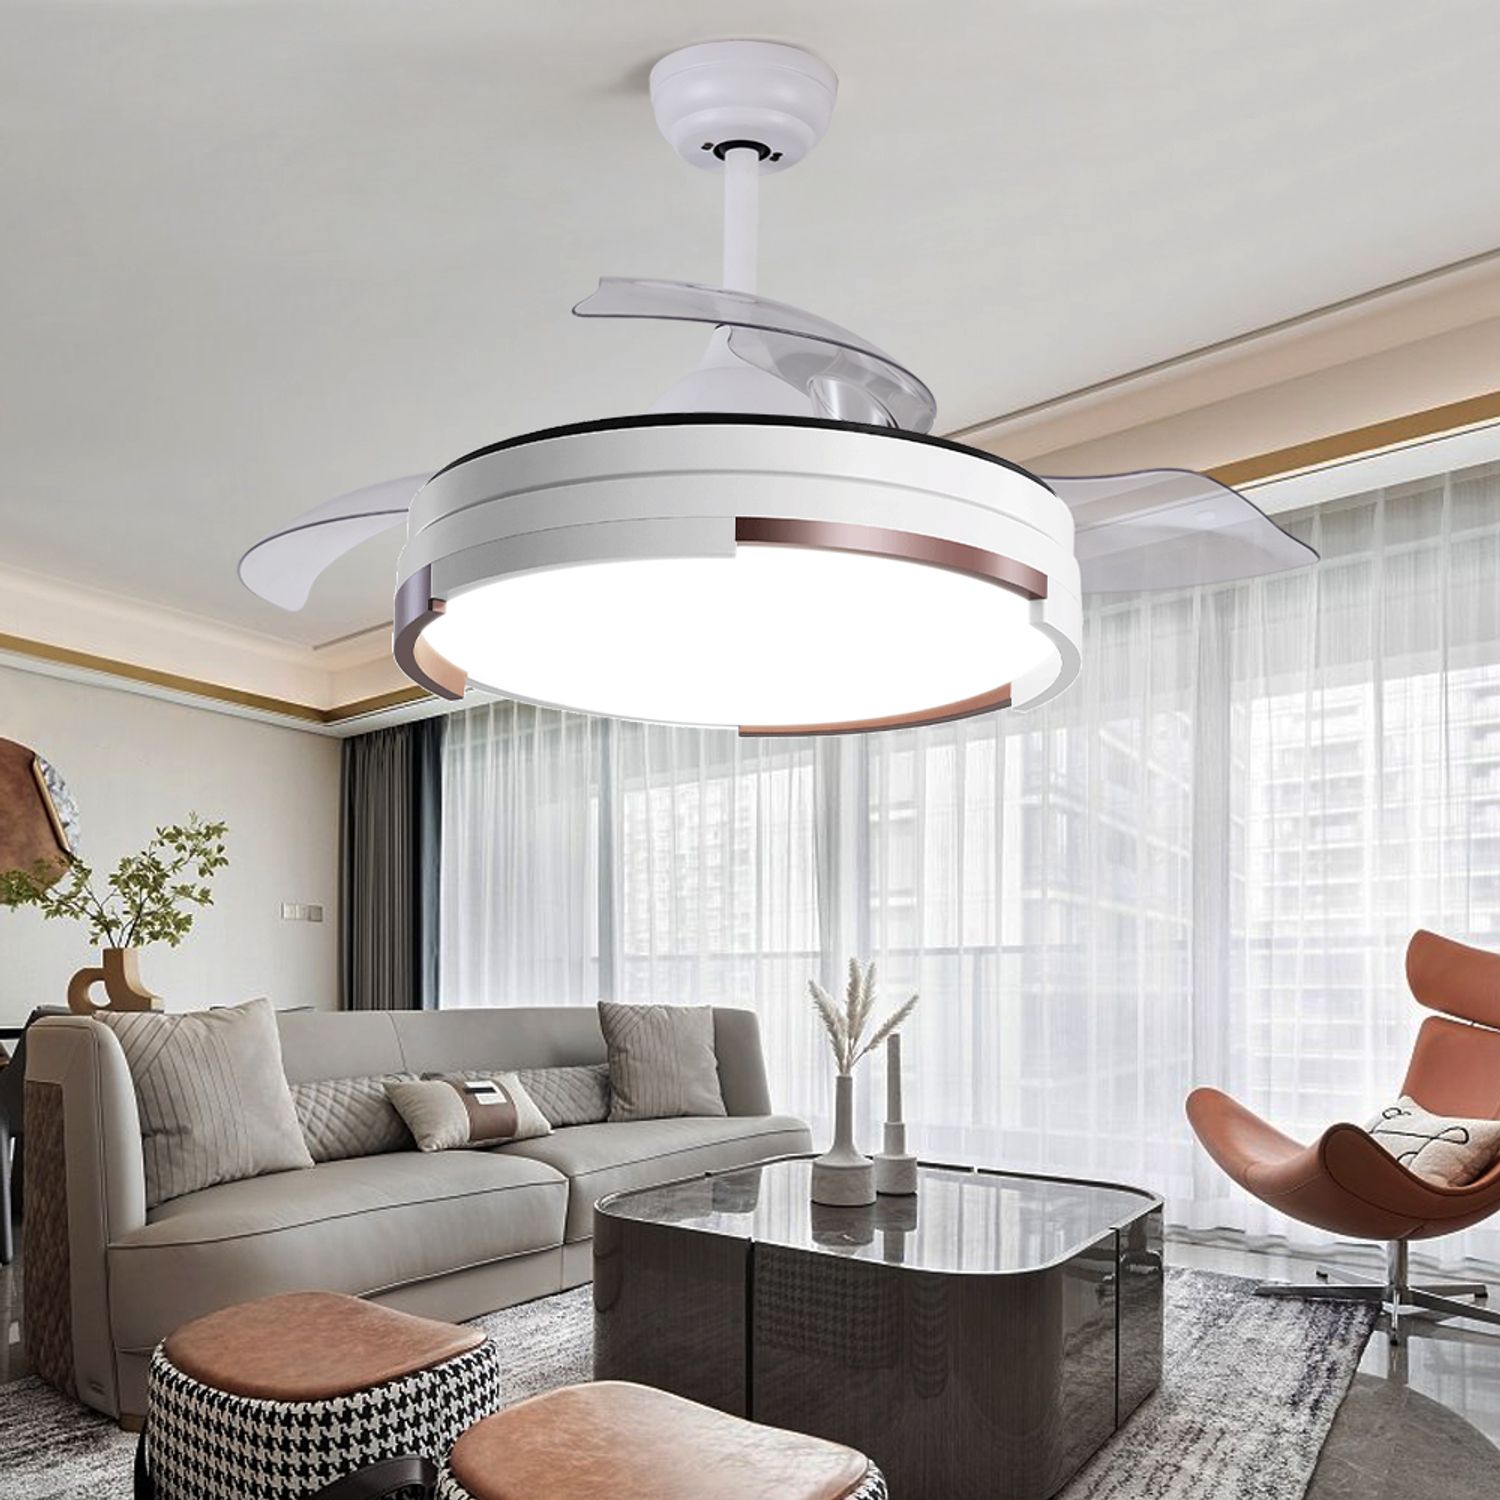 Stylish Retractable Ceiling Fan with Light